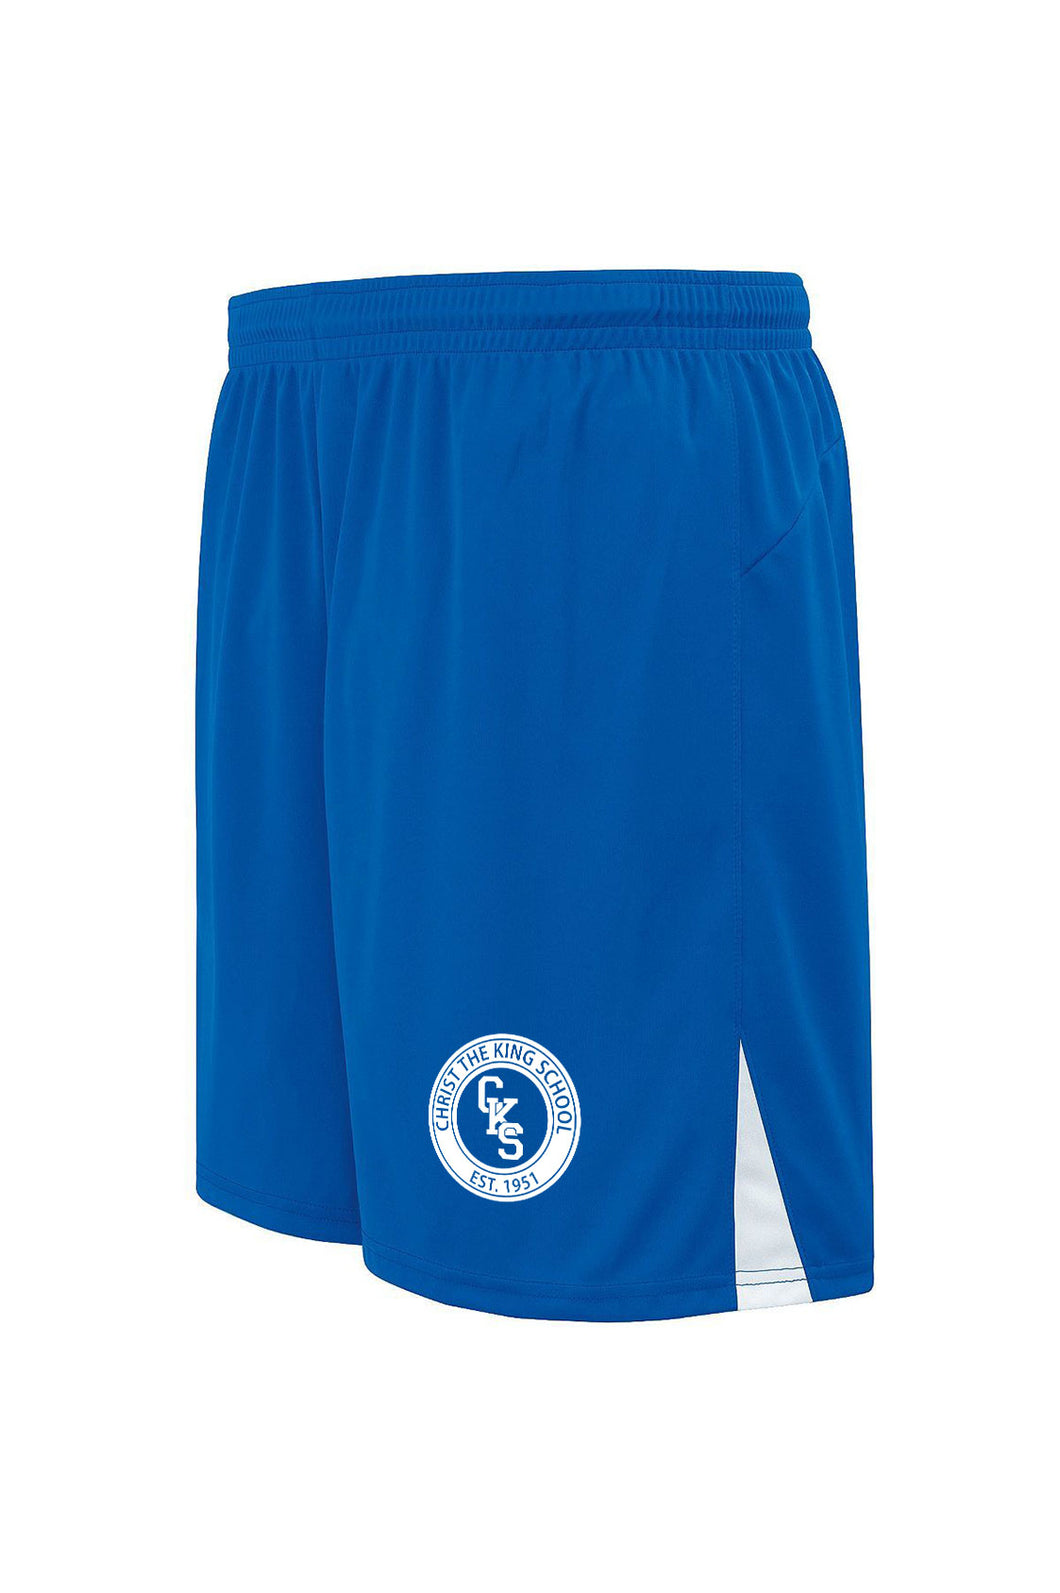 Youth Dry Fit Shorts- BOYS XS ONLY! 2 COLORS